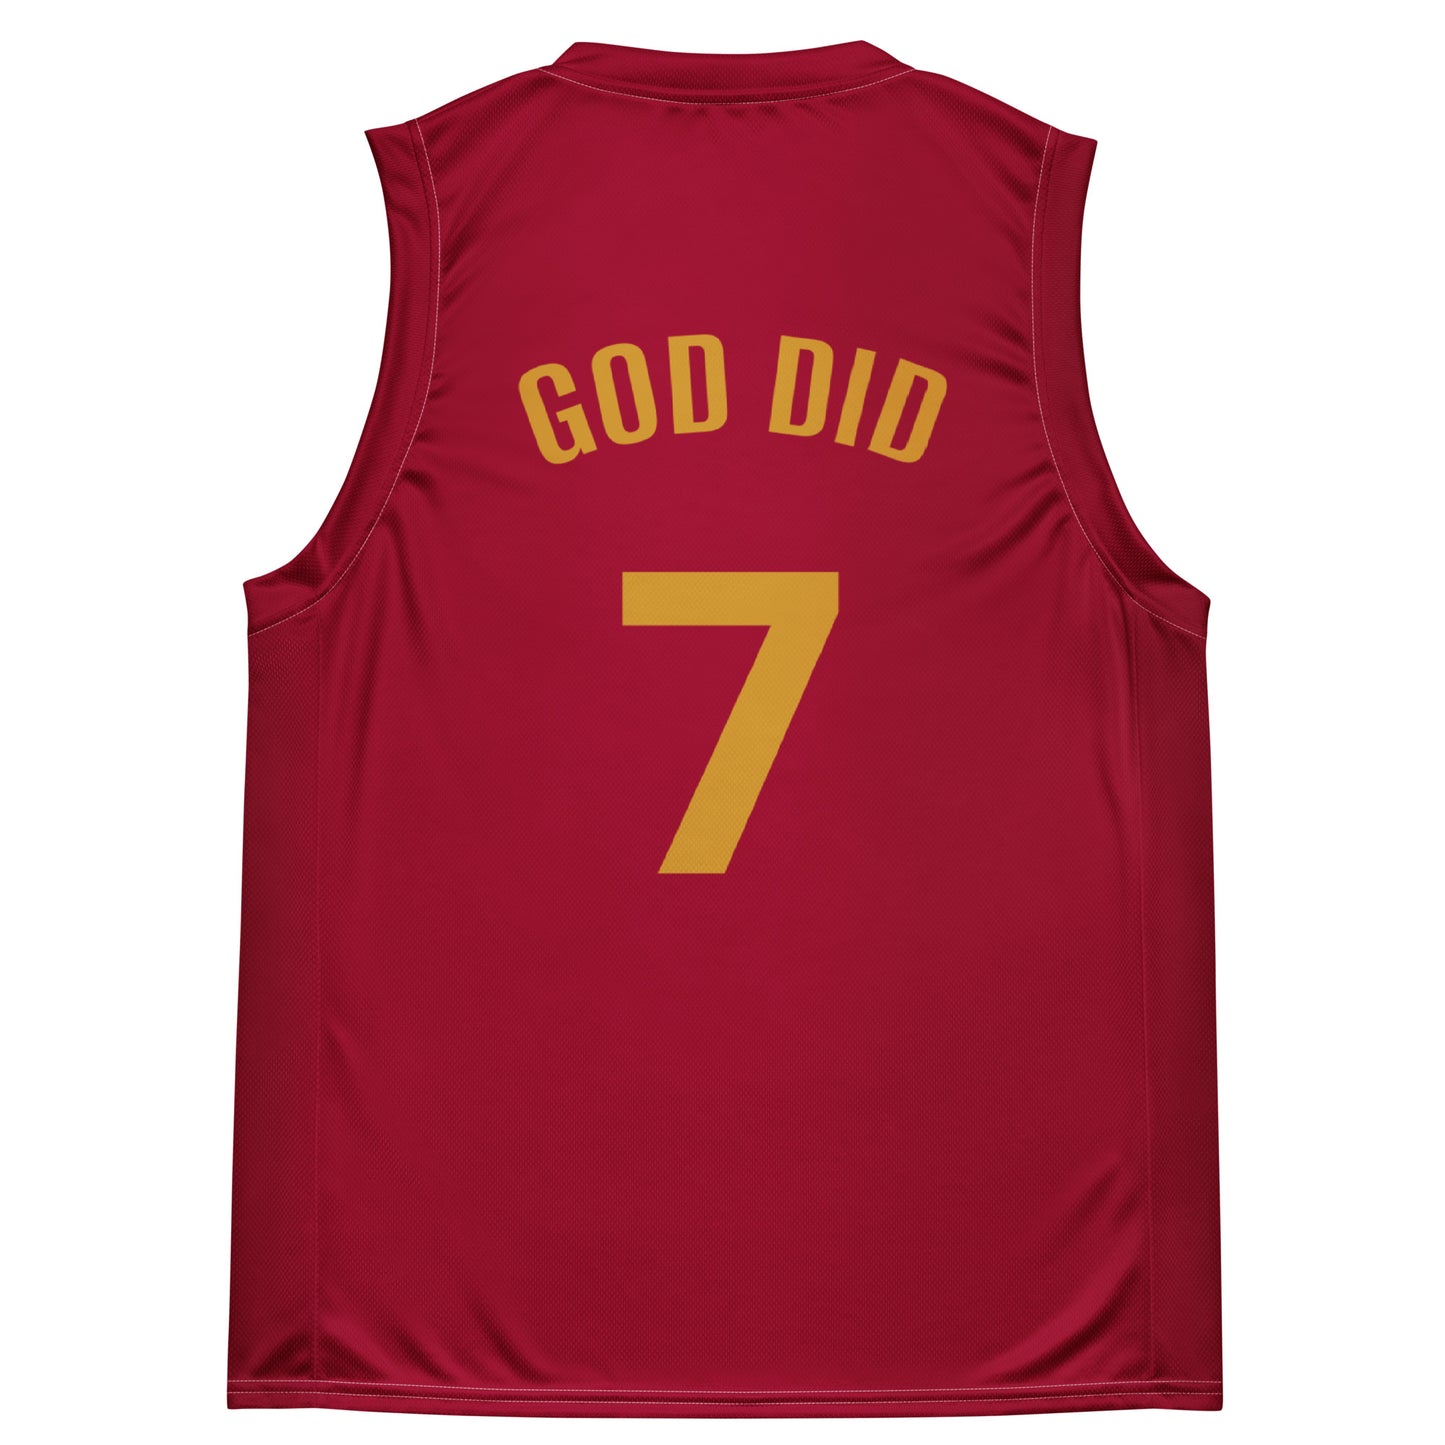 #7 GOD DID red and gold basketball jersey